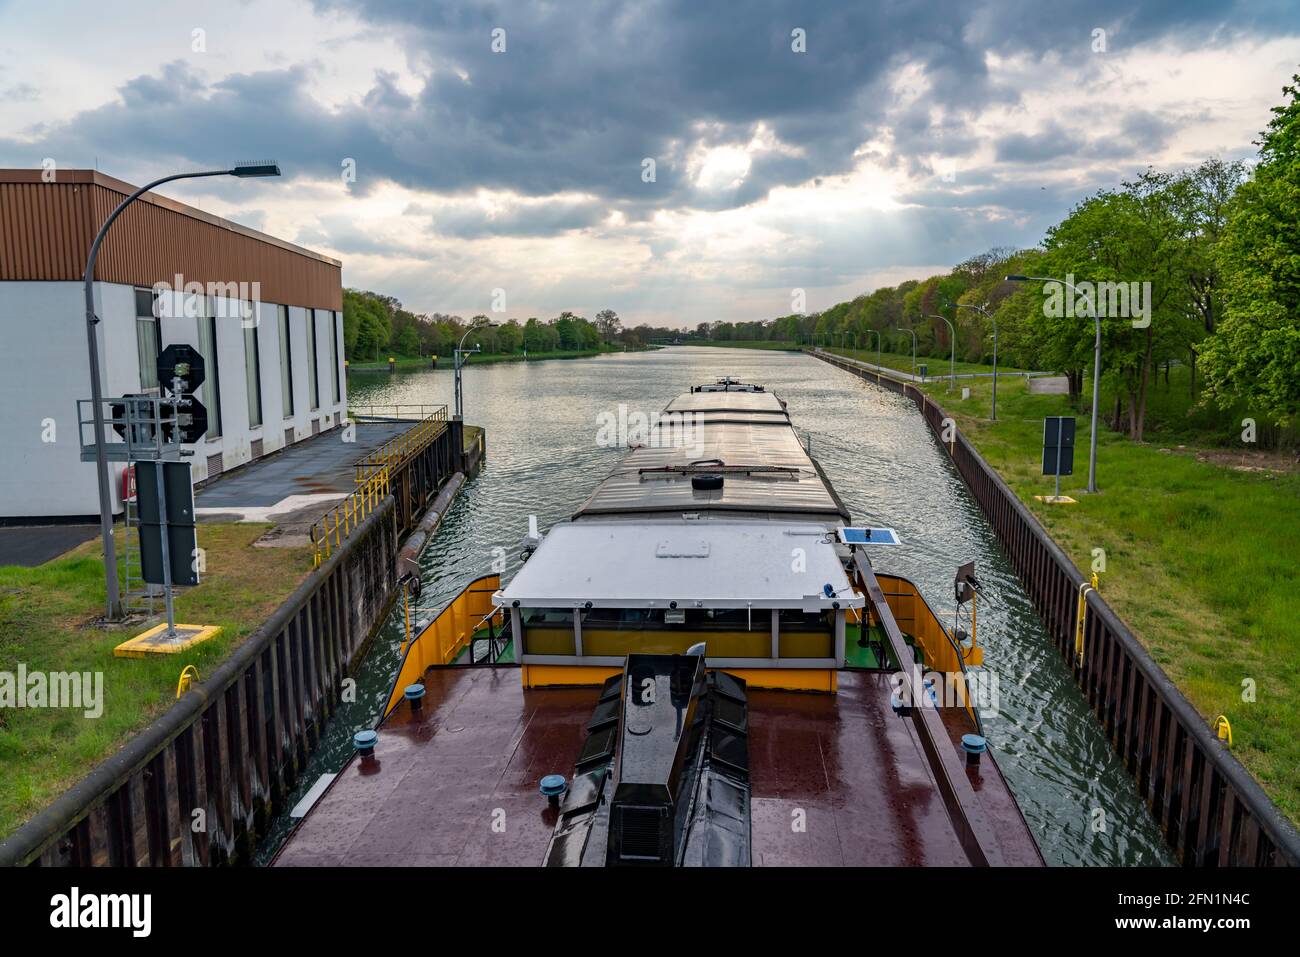 Cargo ship on the Wesel-Datteln Canal, leaving the Hünxe lock, NRW, Germany Stock Photo